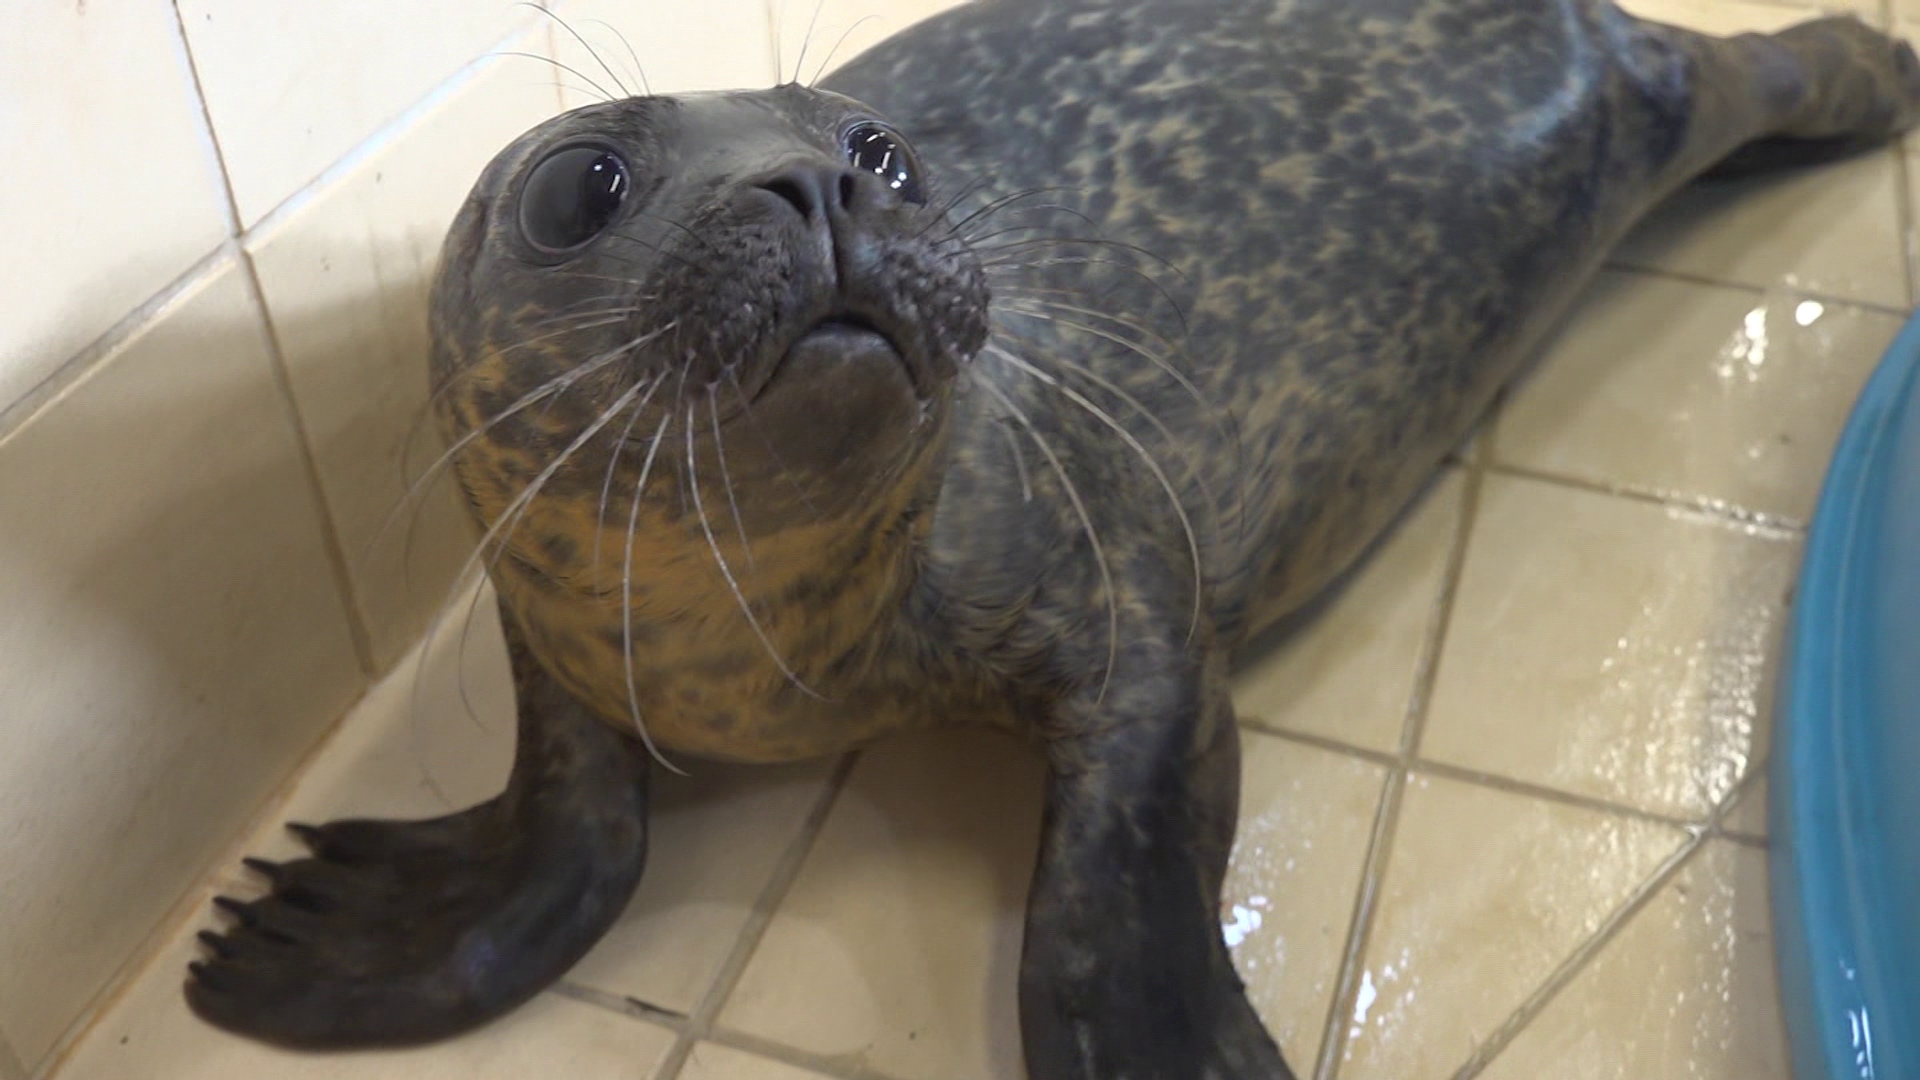 The sanctuary is 'confident' the other three common seals will be just fine. 